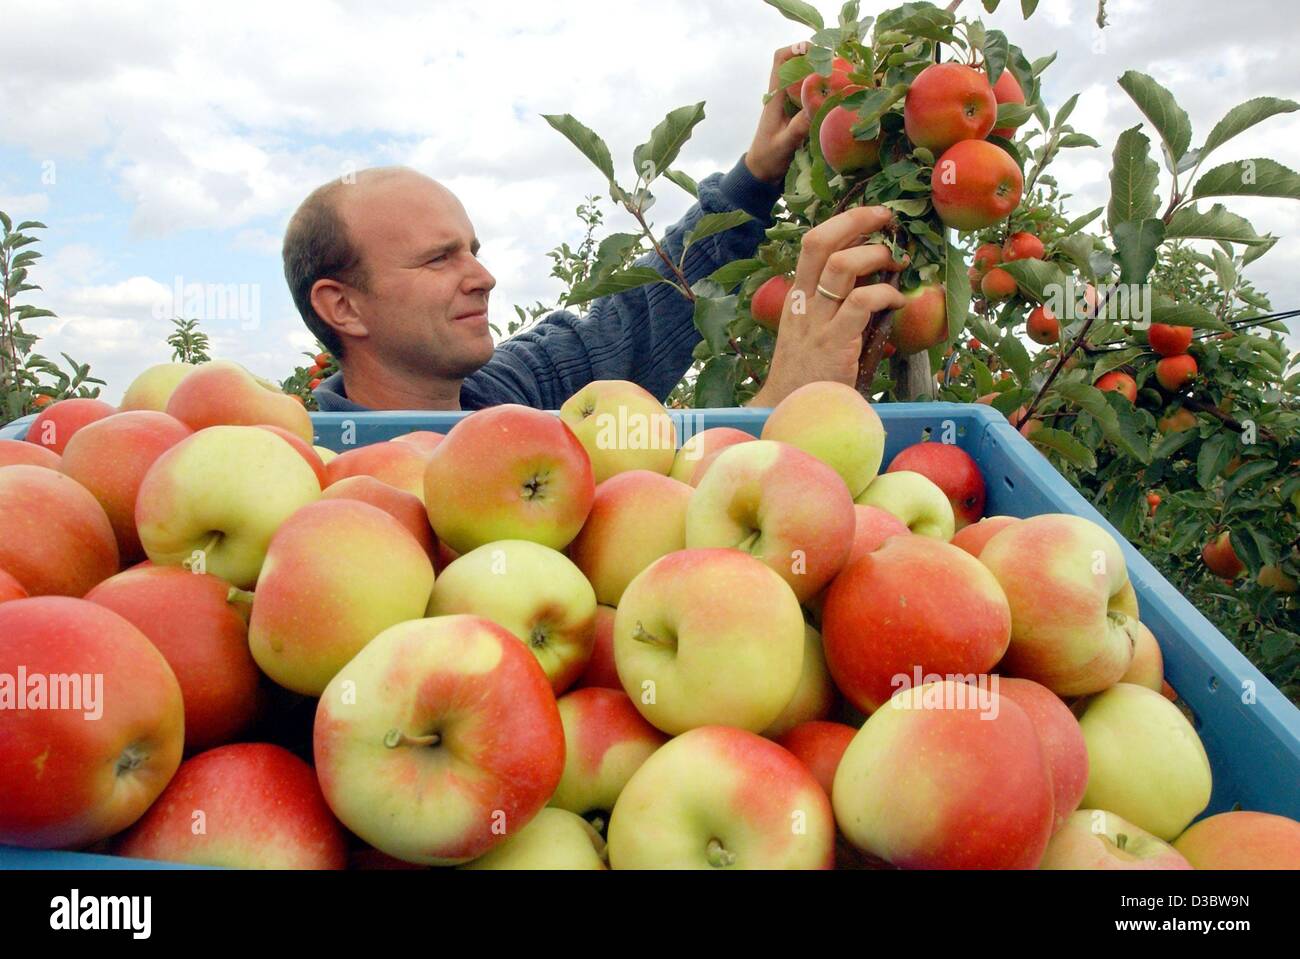 (dpa) - Fruit grower Dirk Sonntag picks apples of the Gala kind on his orchard in Gelsdorf, Germany, 19 August 2003. Apples are about two weeks early this year due to the hot summer season. Stock Photo